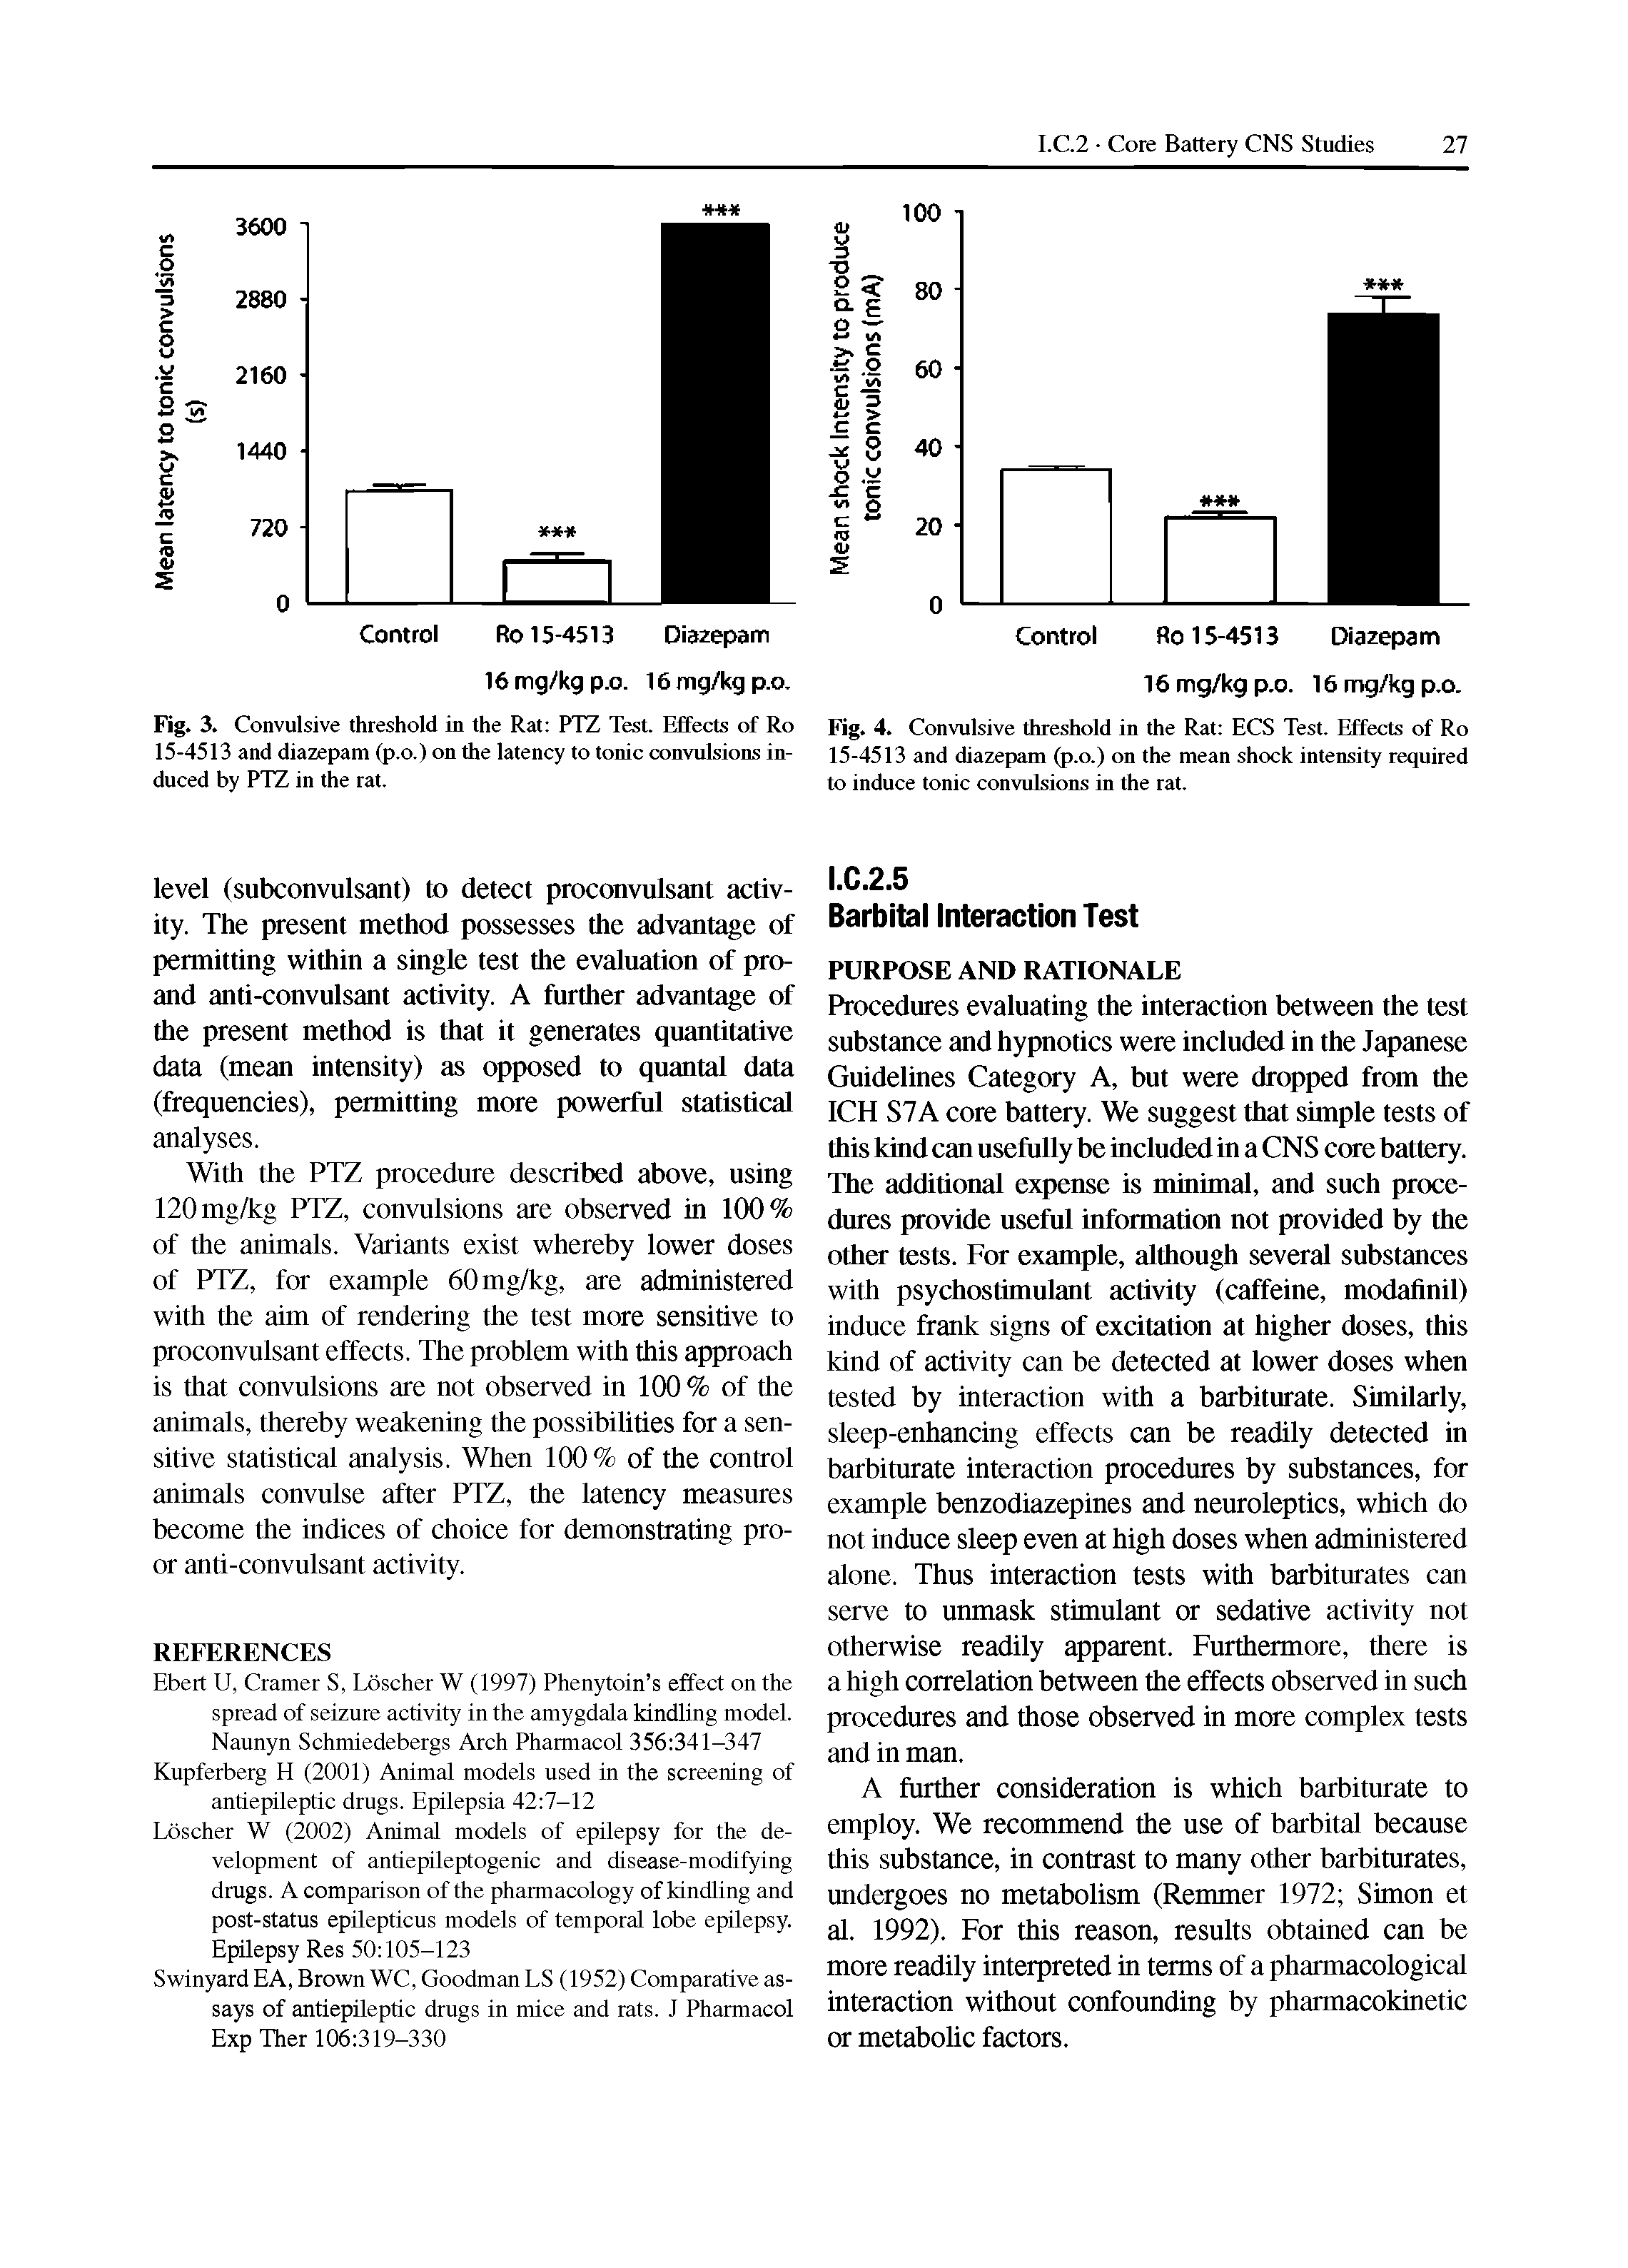 Fig. 3. Convulsive threshold in the Rat PTZ Test. Effects of Ro 15-4513 and diazepam (p.o.) on the latency to tonic convulsions induced by PTZ in the rat.